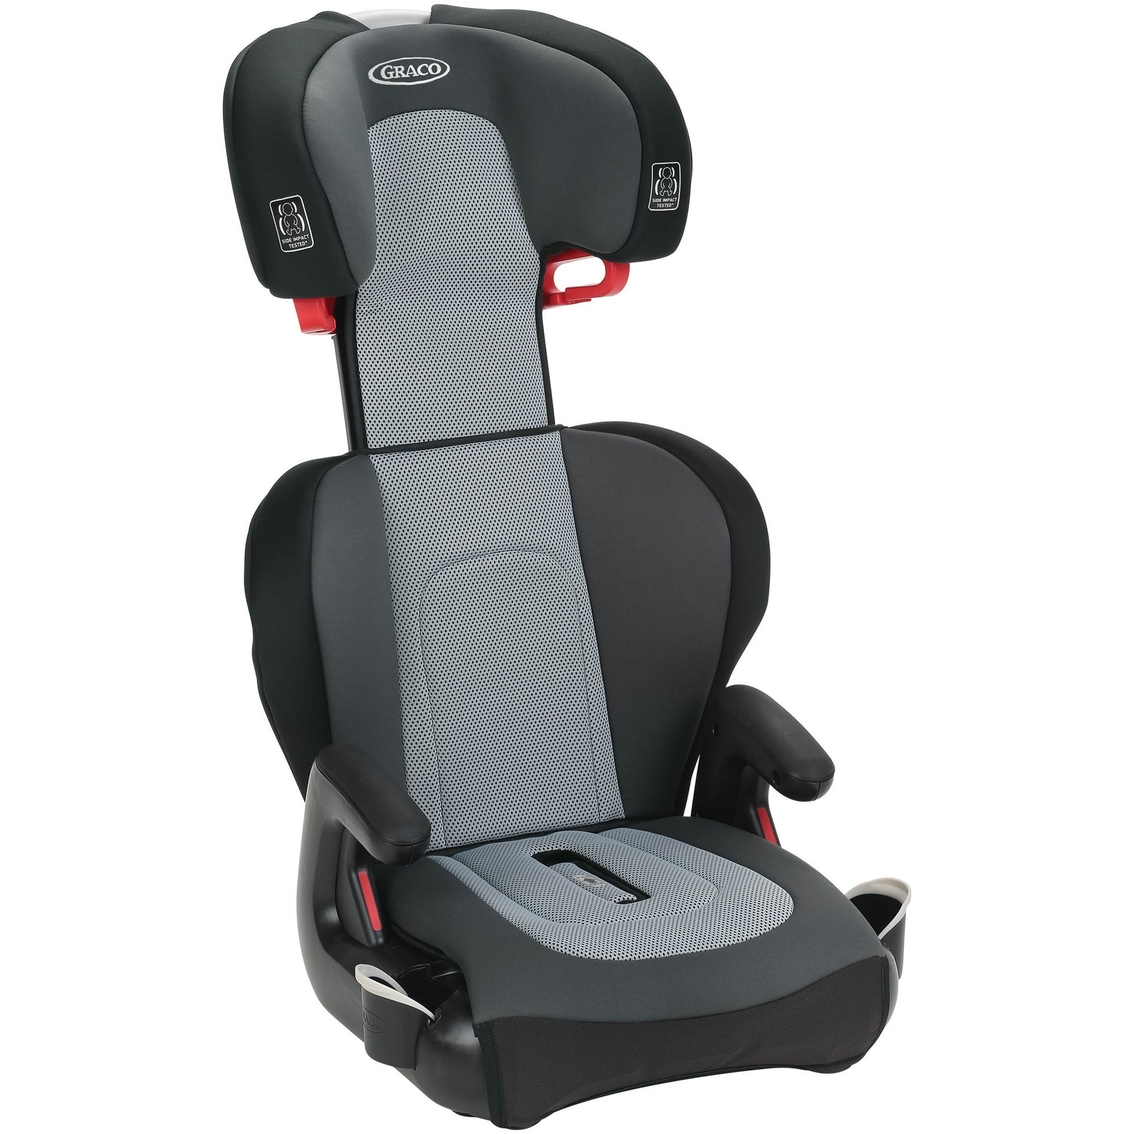 Graco TakeAlong Highback TurboBooster Car Seat - Image 2 of 4